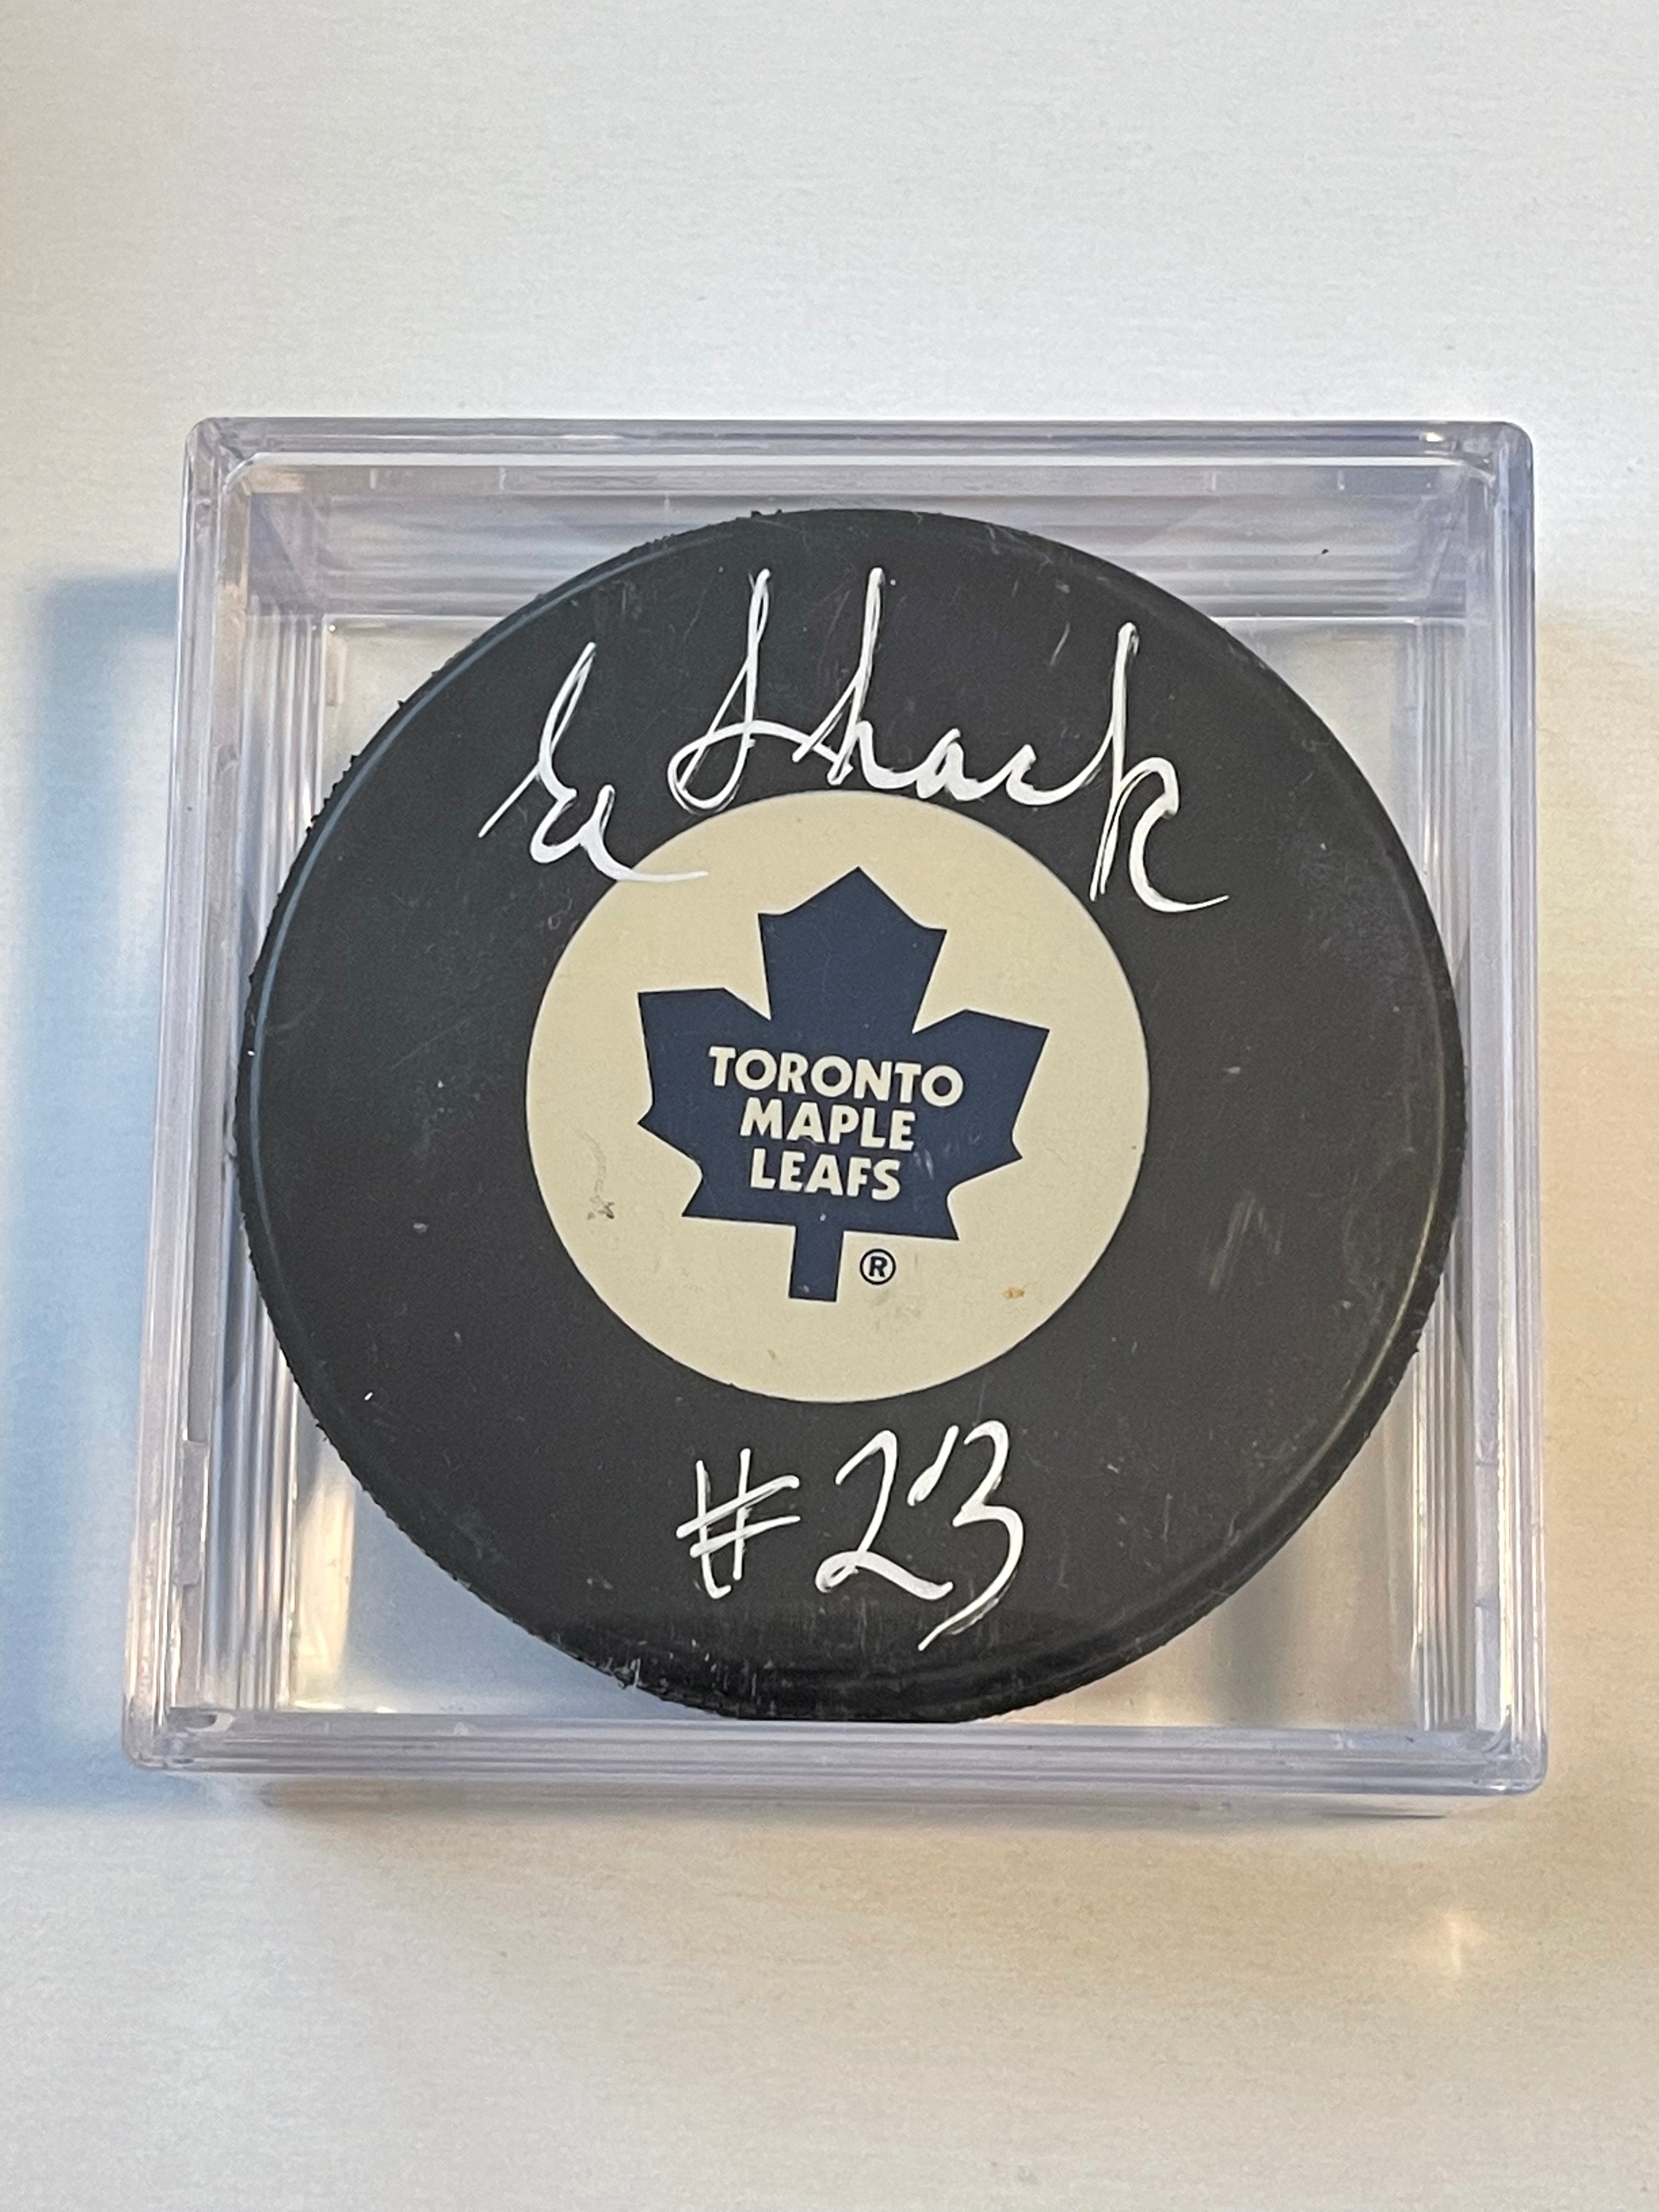 Eddie Shack Toronto Maple Leafs autograph hockey puck in holder with COA